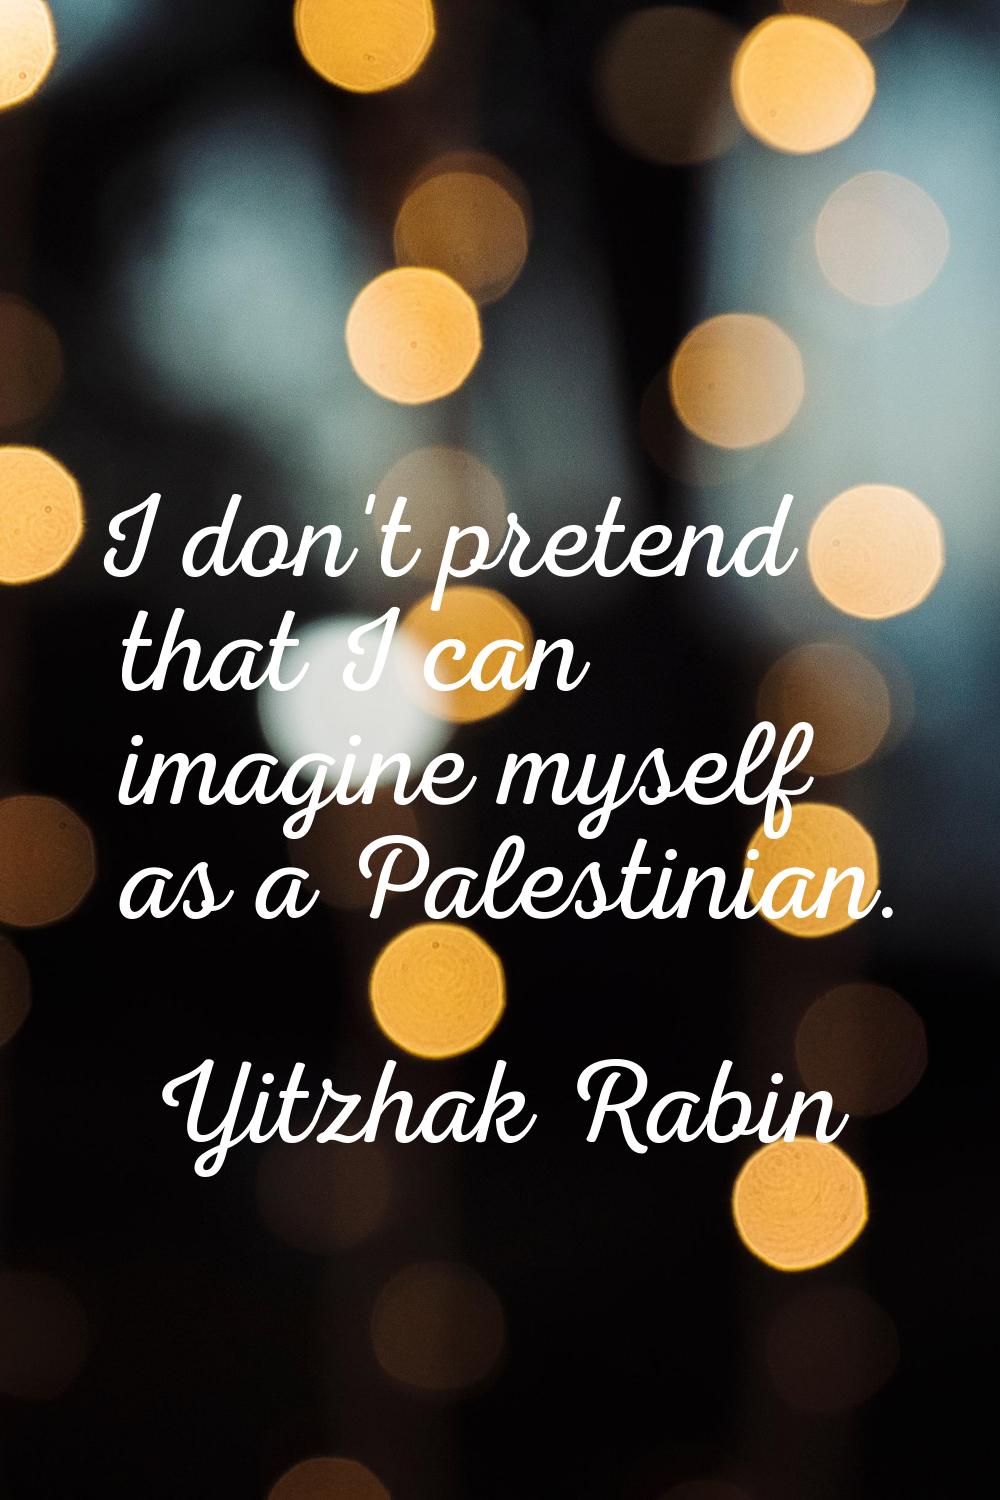 I don't pretend that I can imagine myself as a Palestinian.